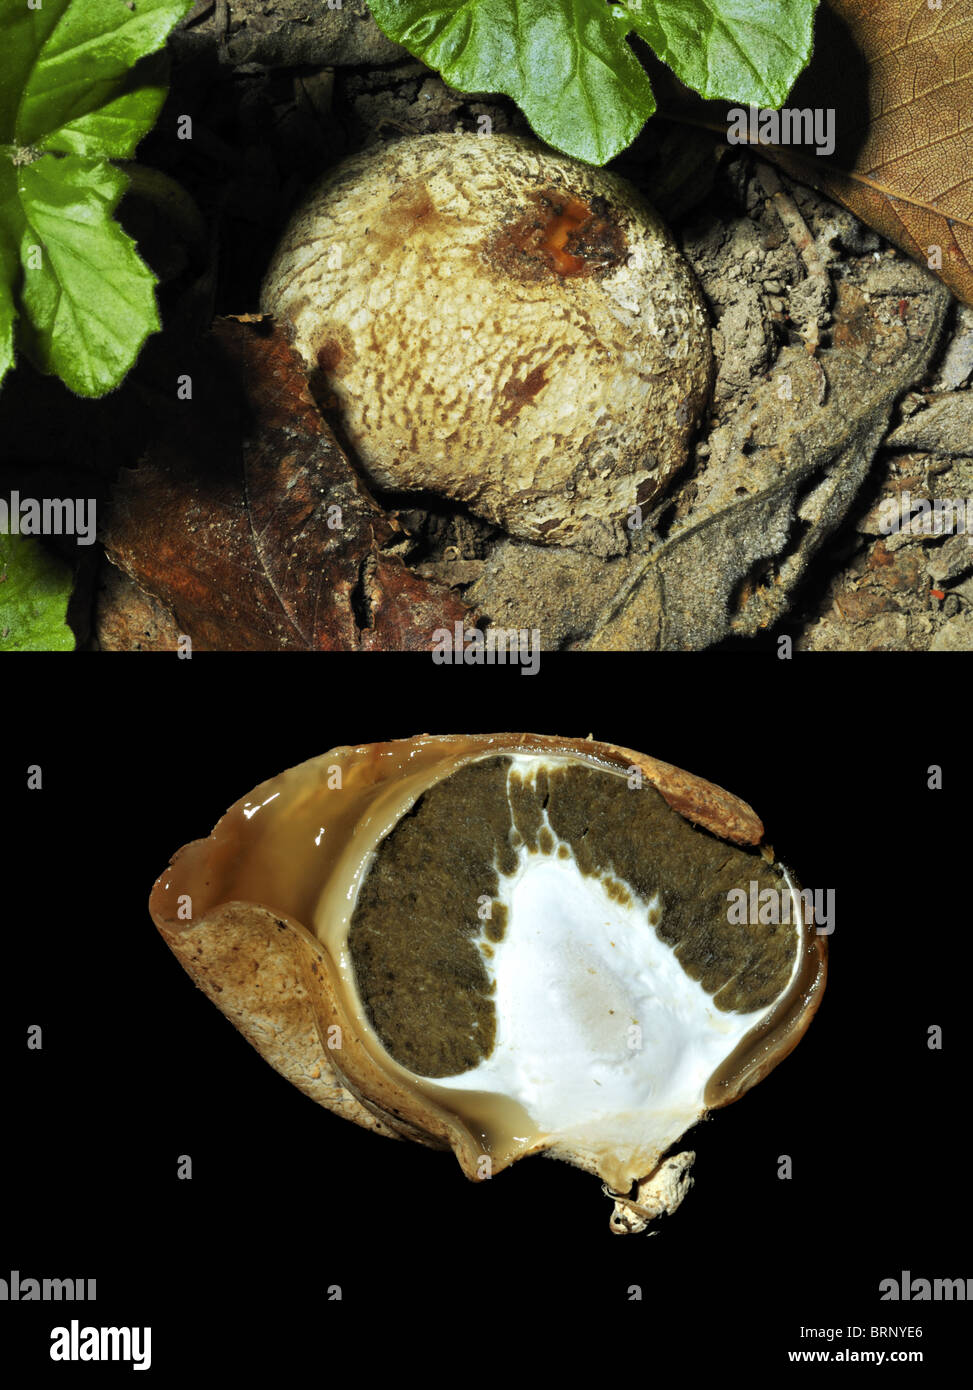 view of Phallus impudicus in 'egg' stage and cross section showing spore masses Stock Photo